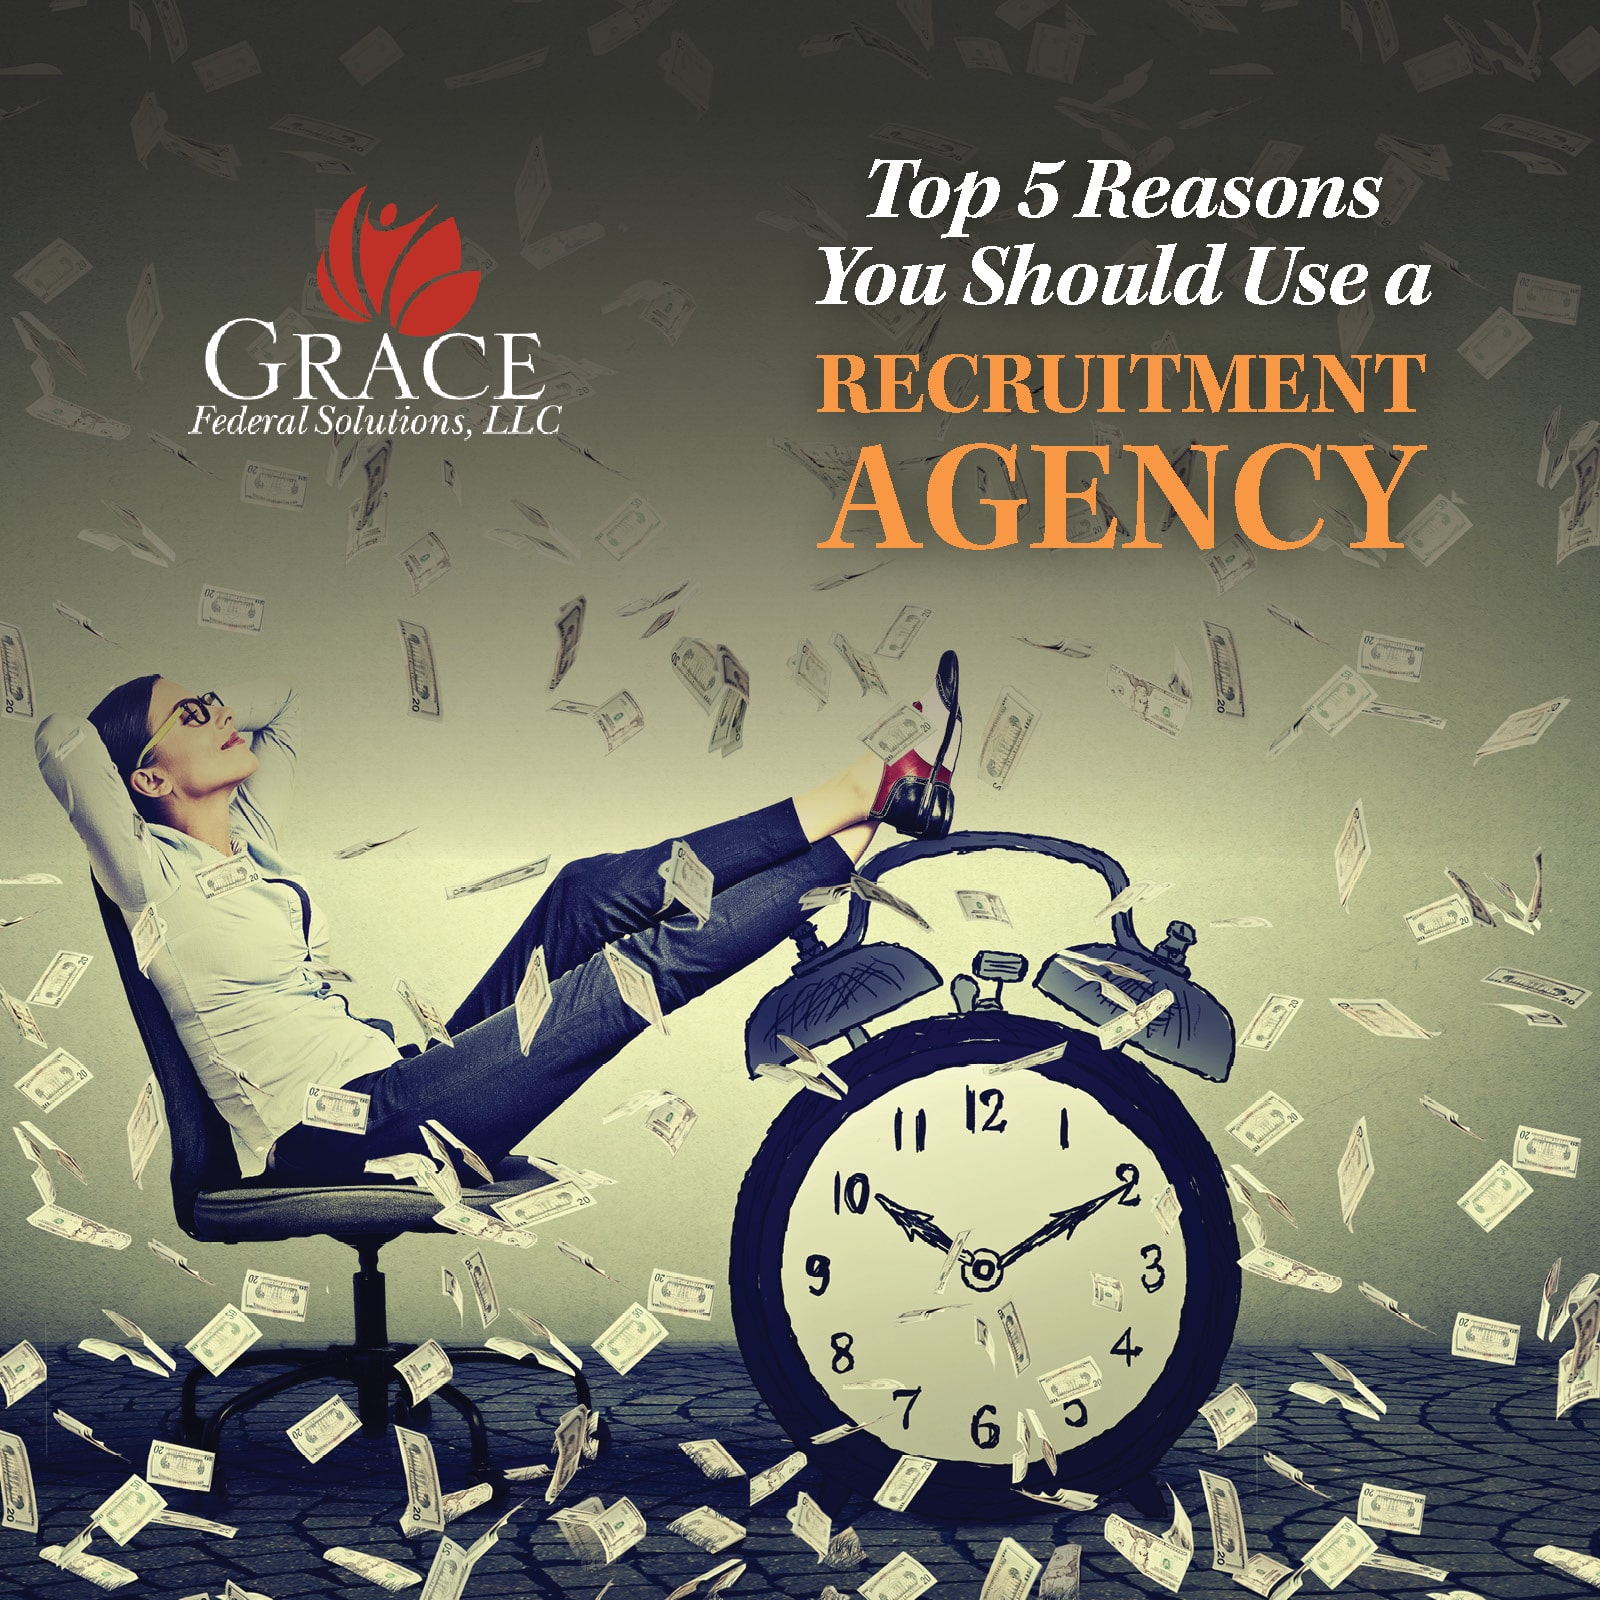 Top 5 Reasons You Should Use A Recruitment Agency